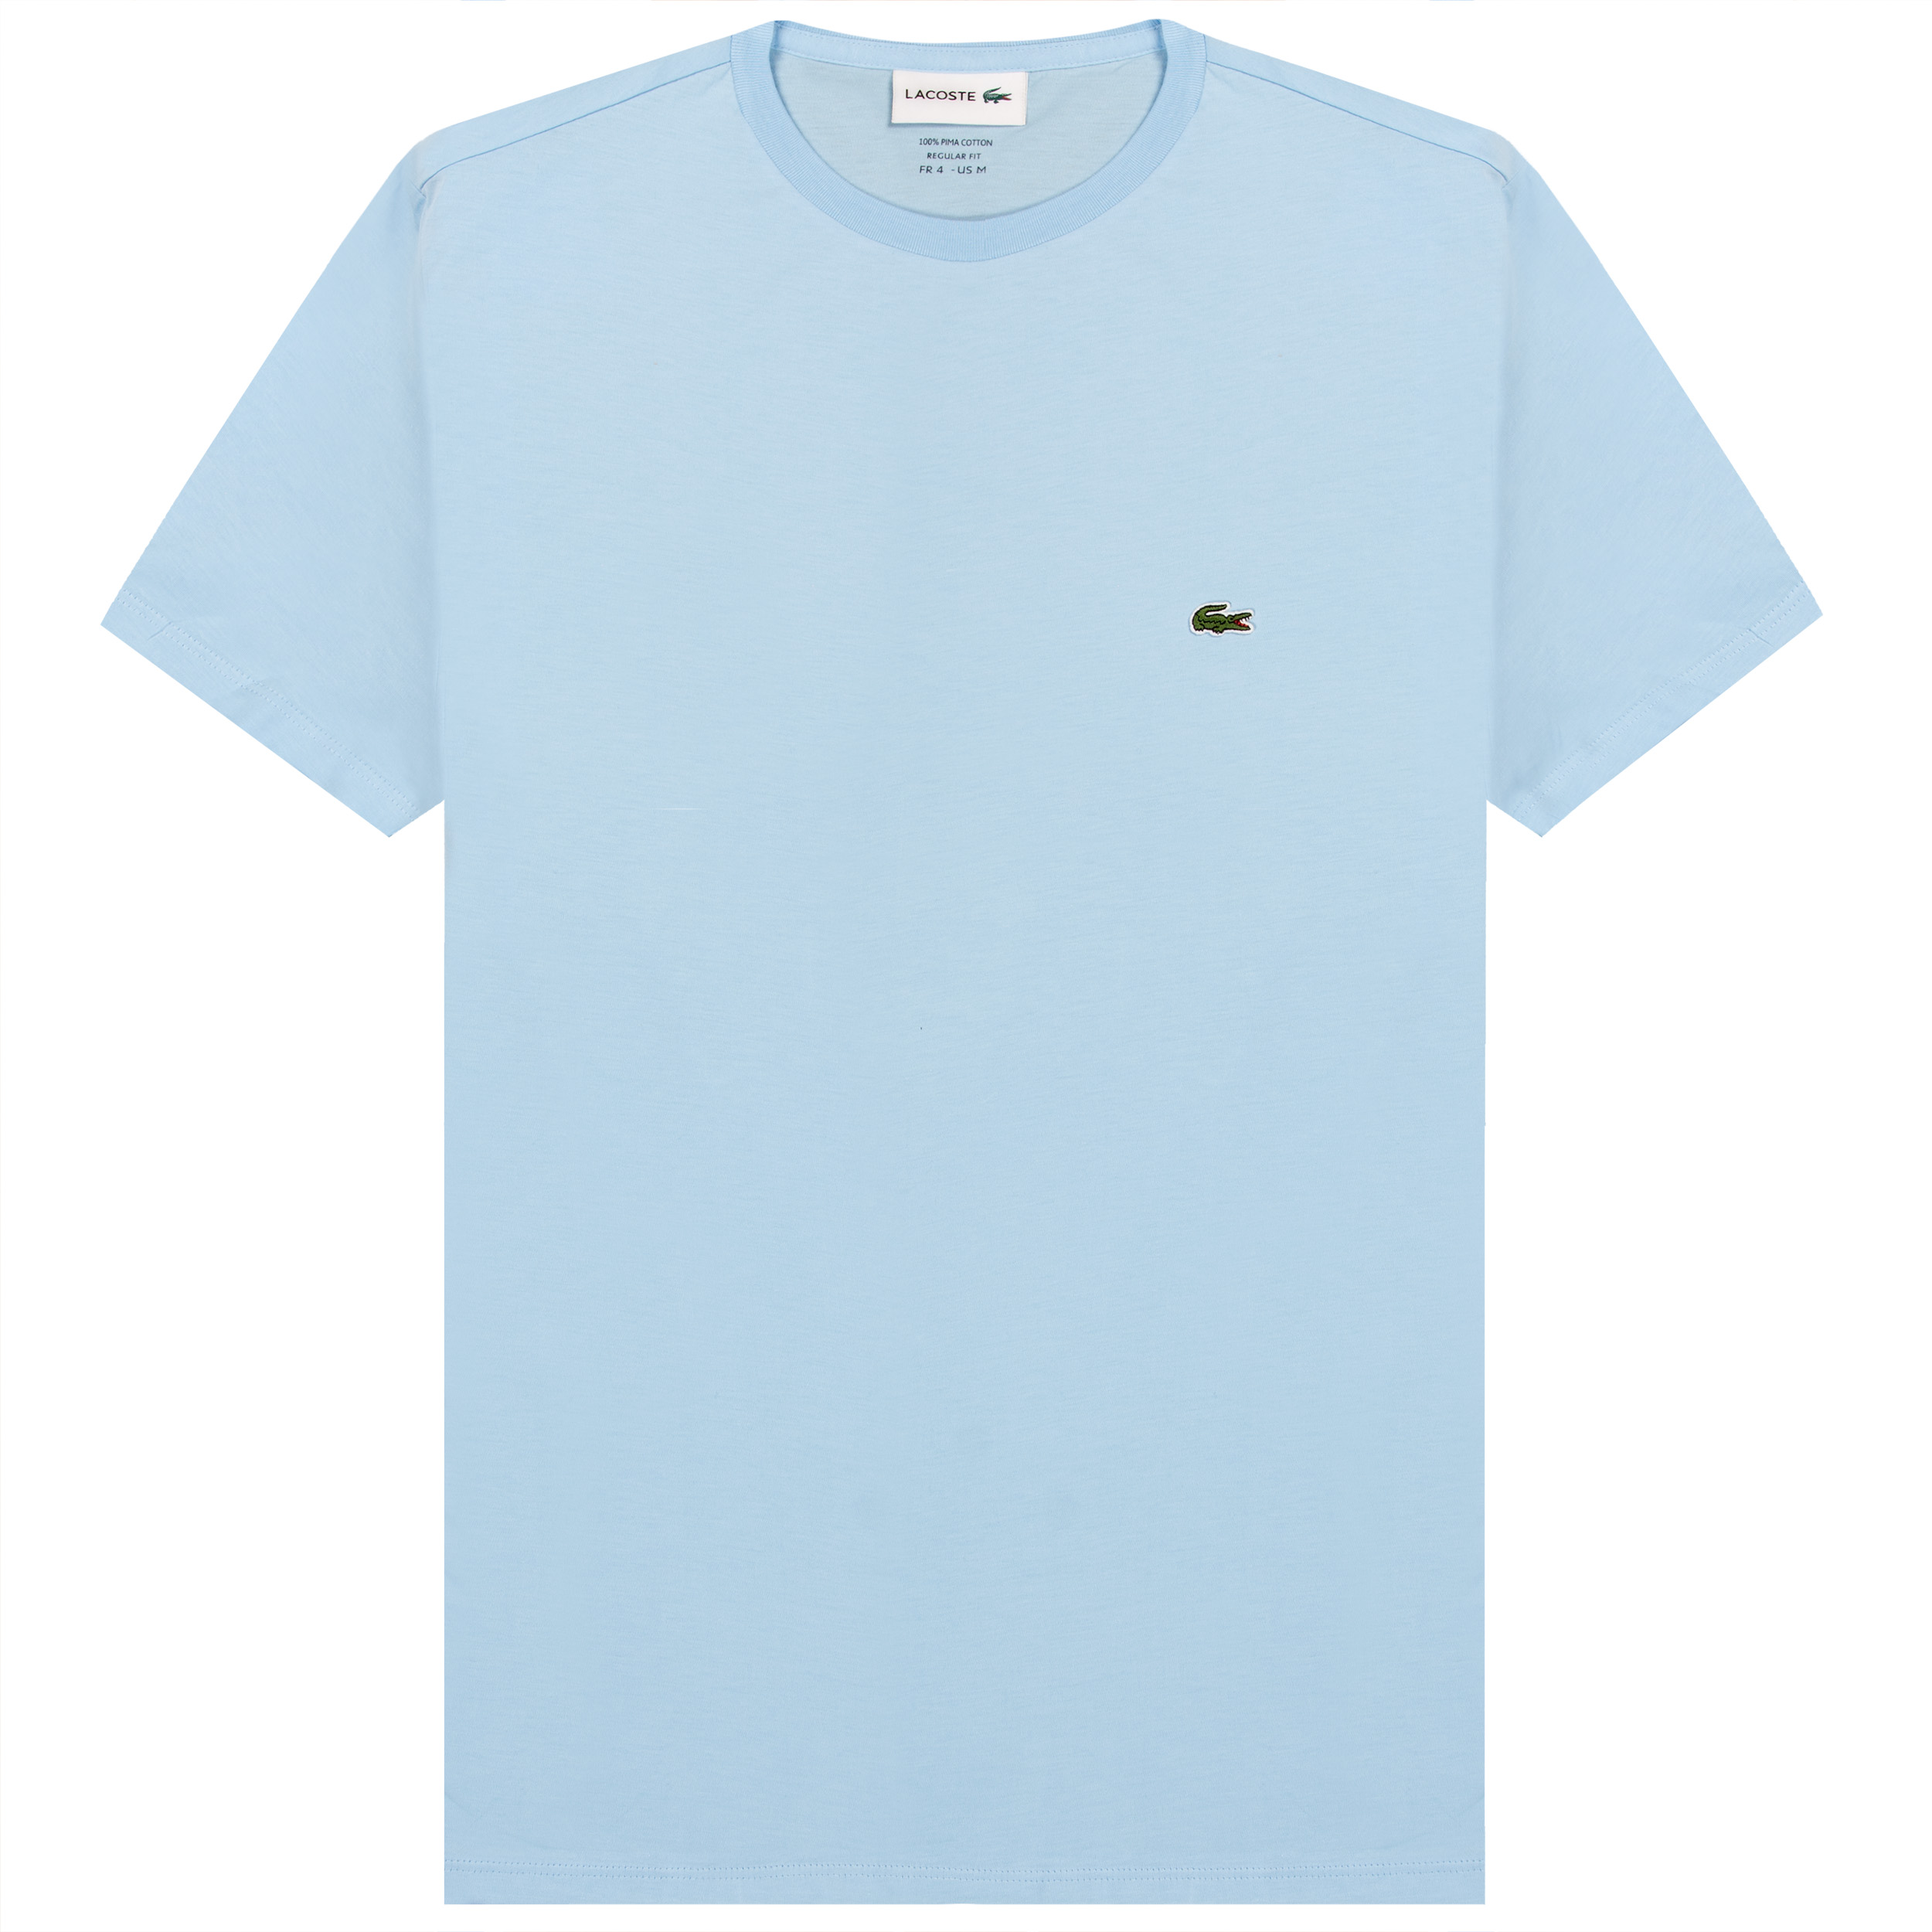 Lacoste Classic Logo T-Shirt Baby Blue